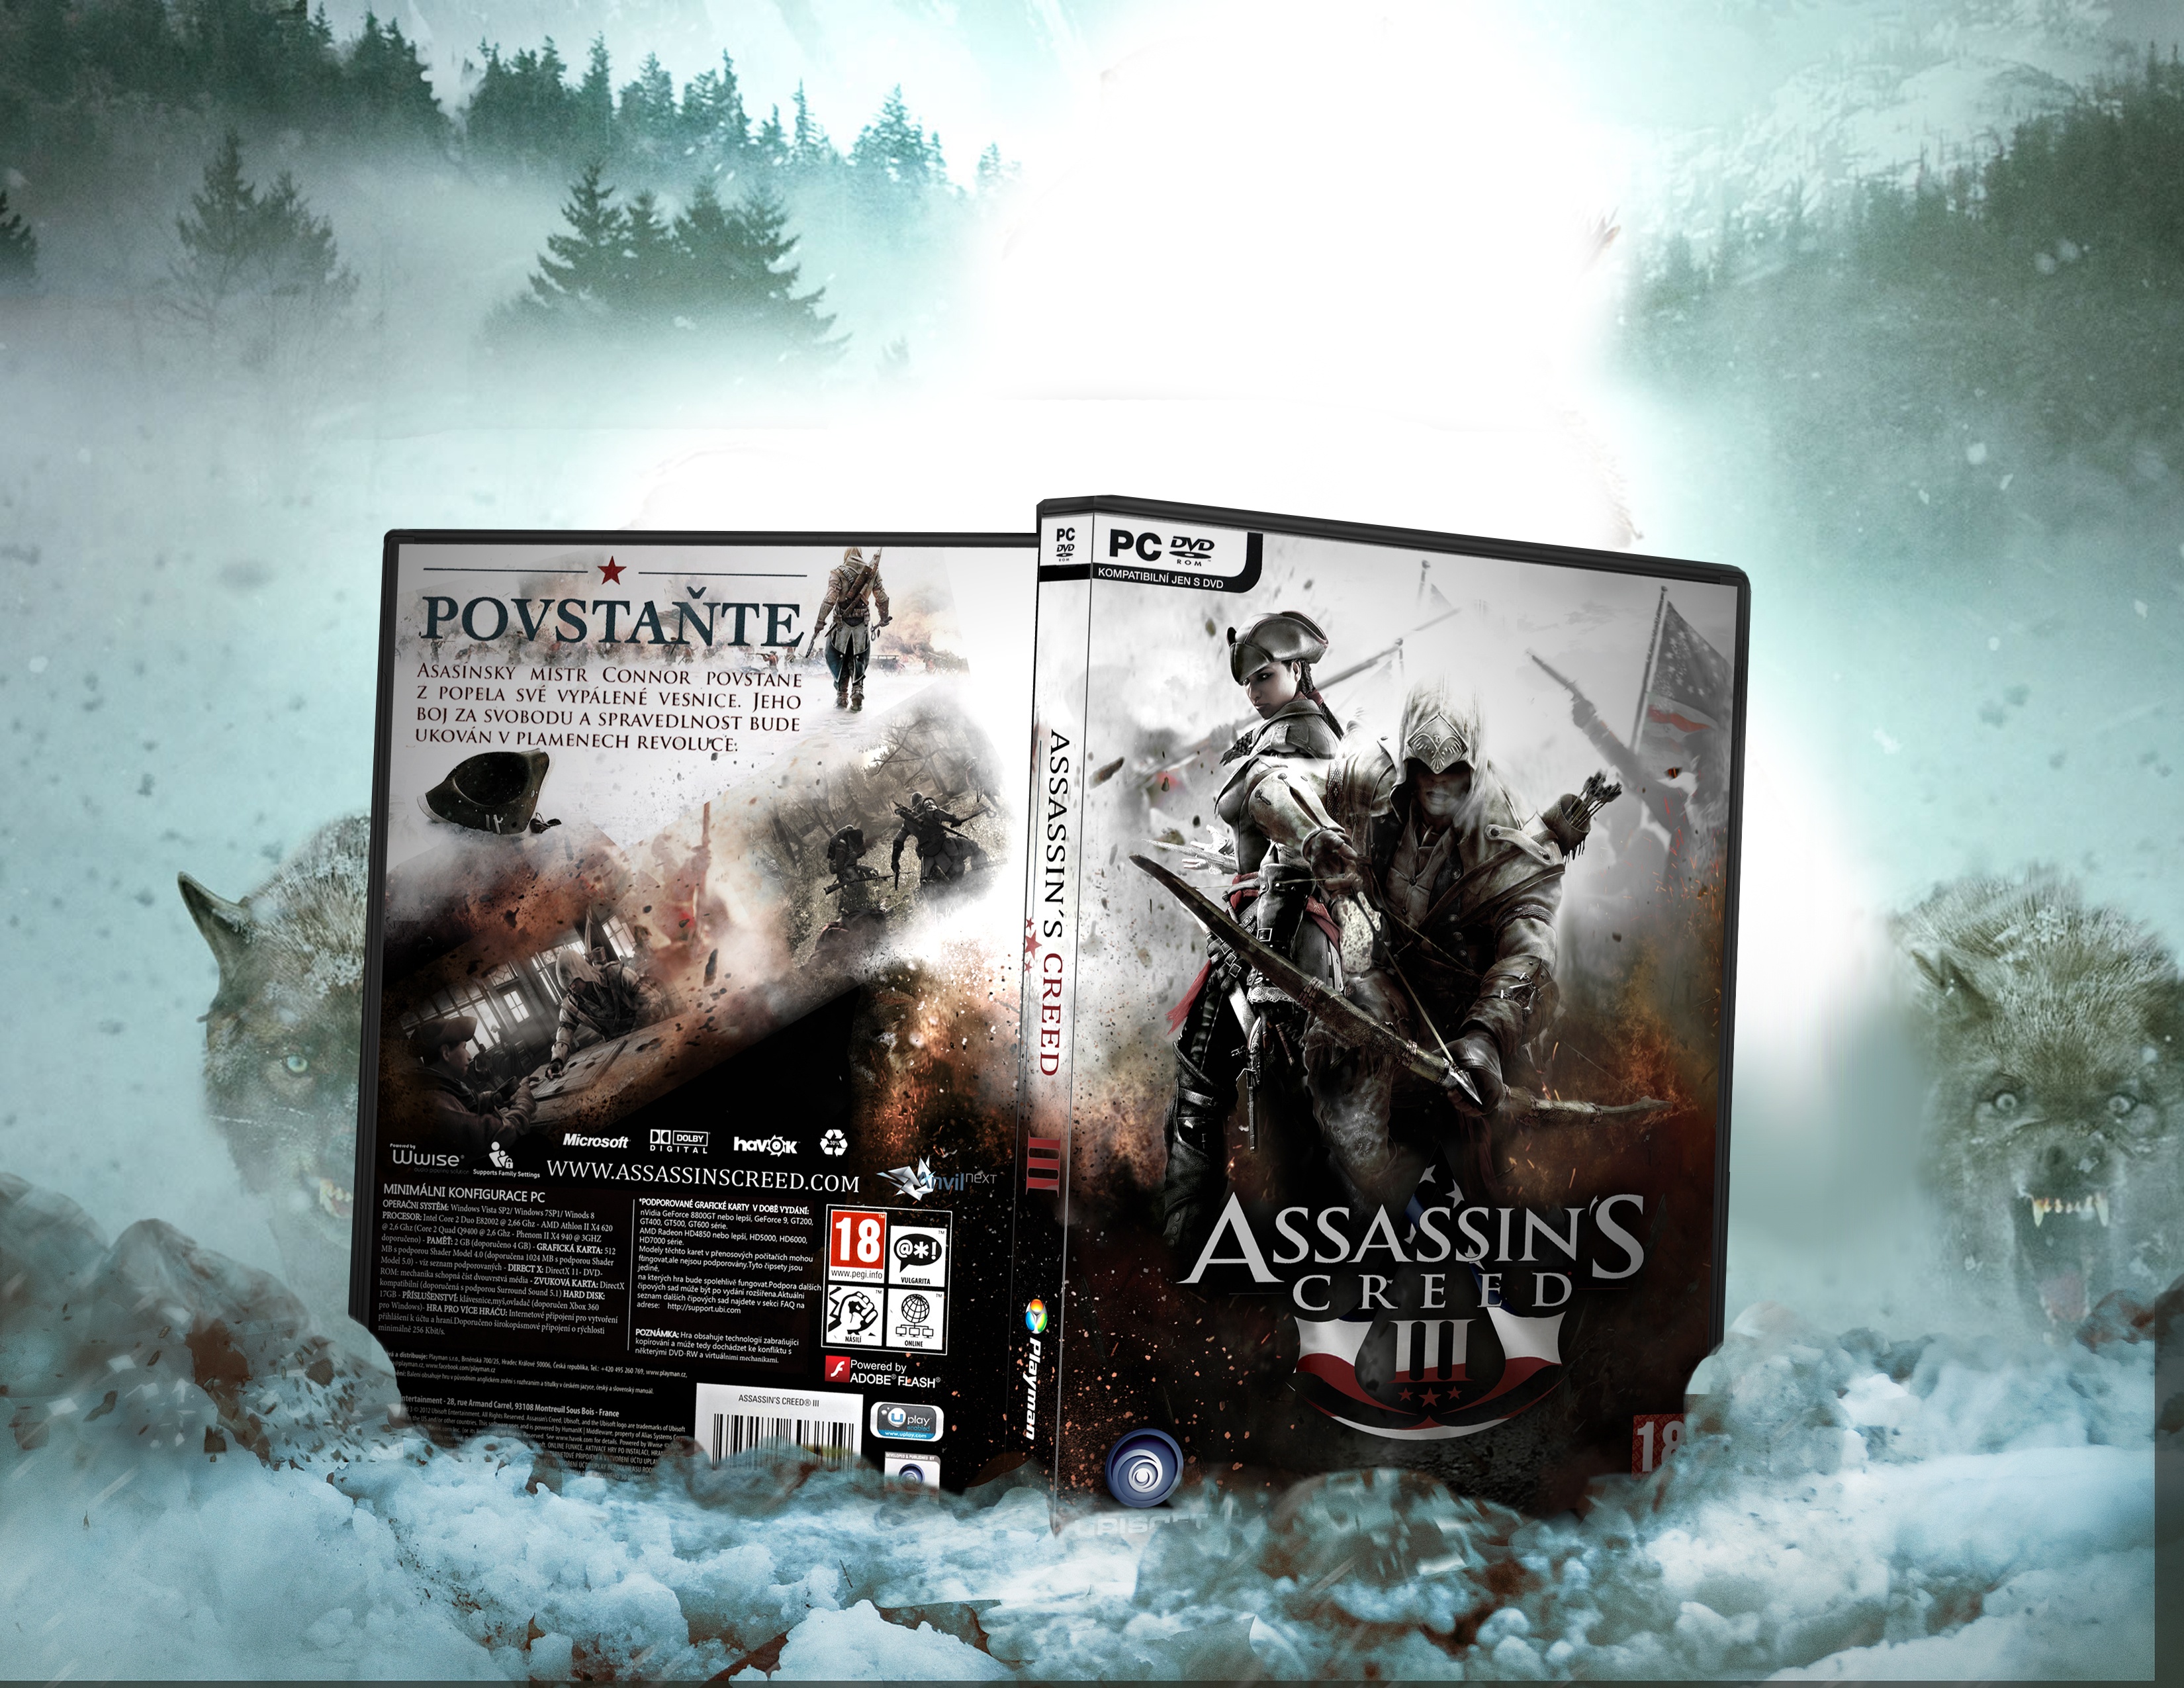 Assassin's Creed 3 - Special Edition box cover